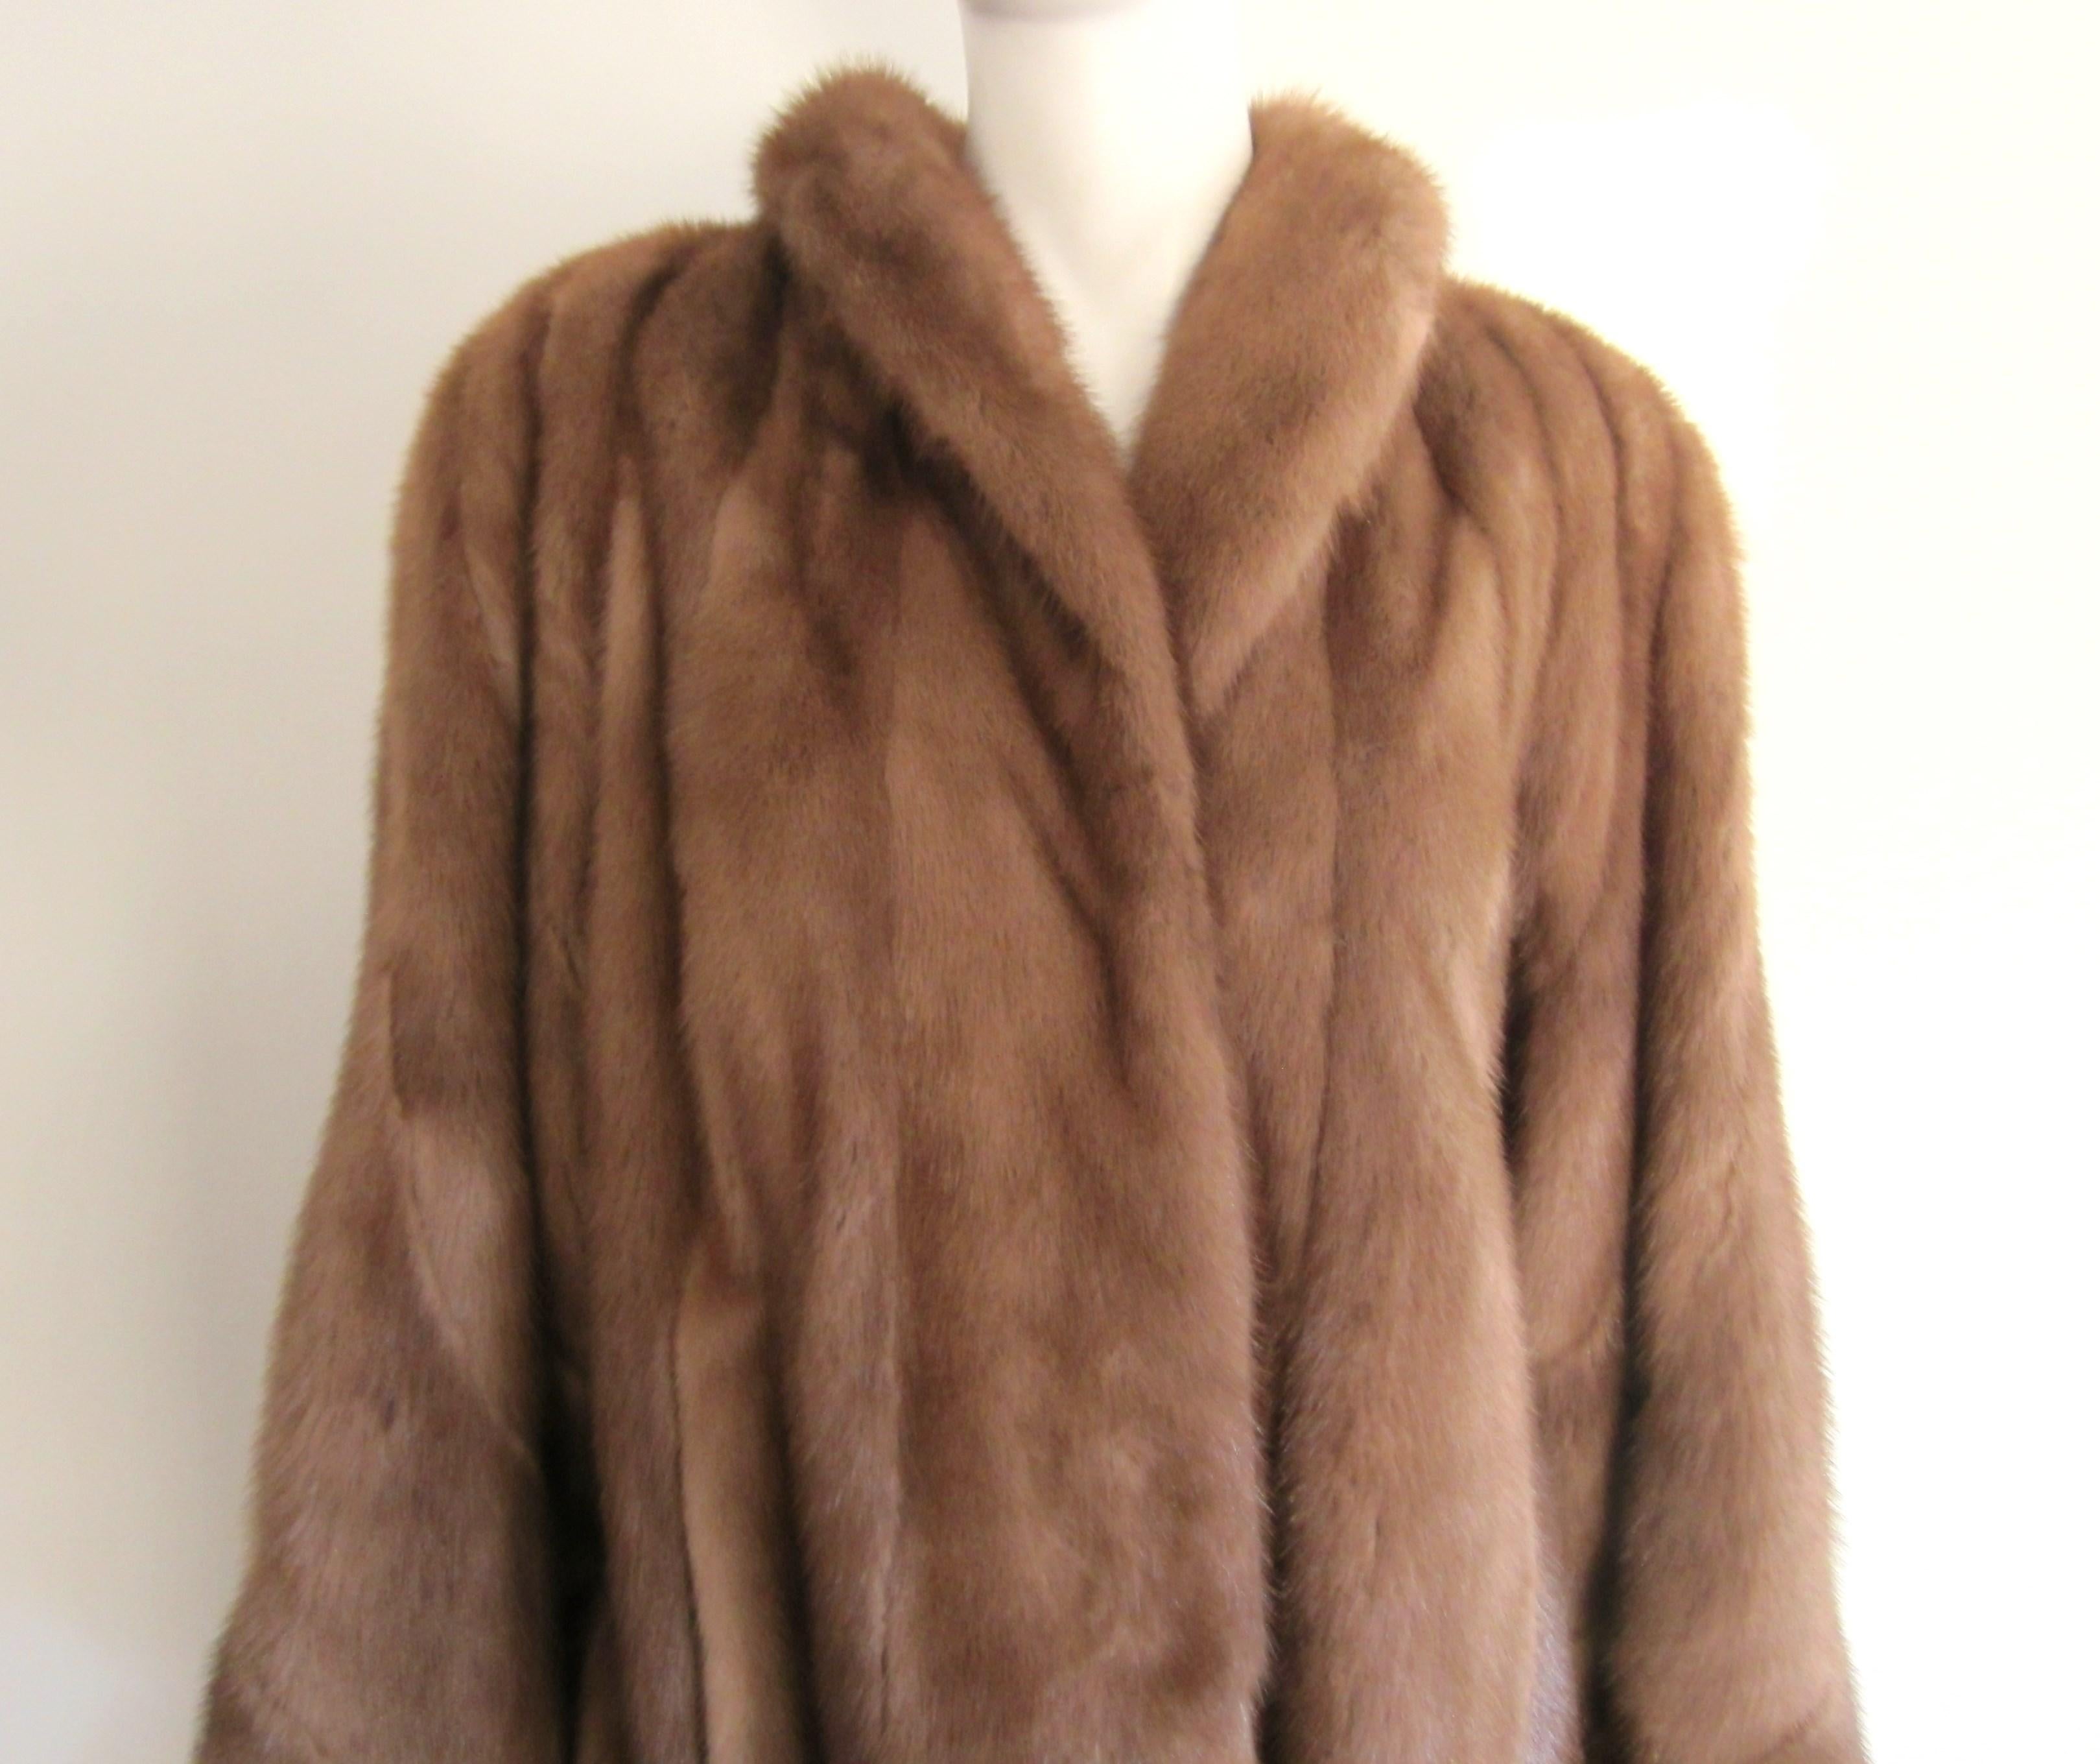  MINK 3/4 LENGTH SWING COAT.  Multi-directional panels on sleeves and the bottom of the coat. Soft and supple mink, no issues. Large swing on this one! 3 hook and eye closures. Slit pockets. Wide sleeves. Measuring Up to 46 in. chest, Up to 48 in.